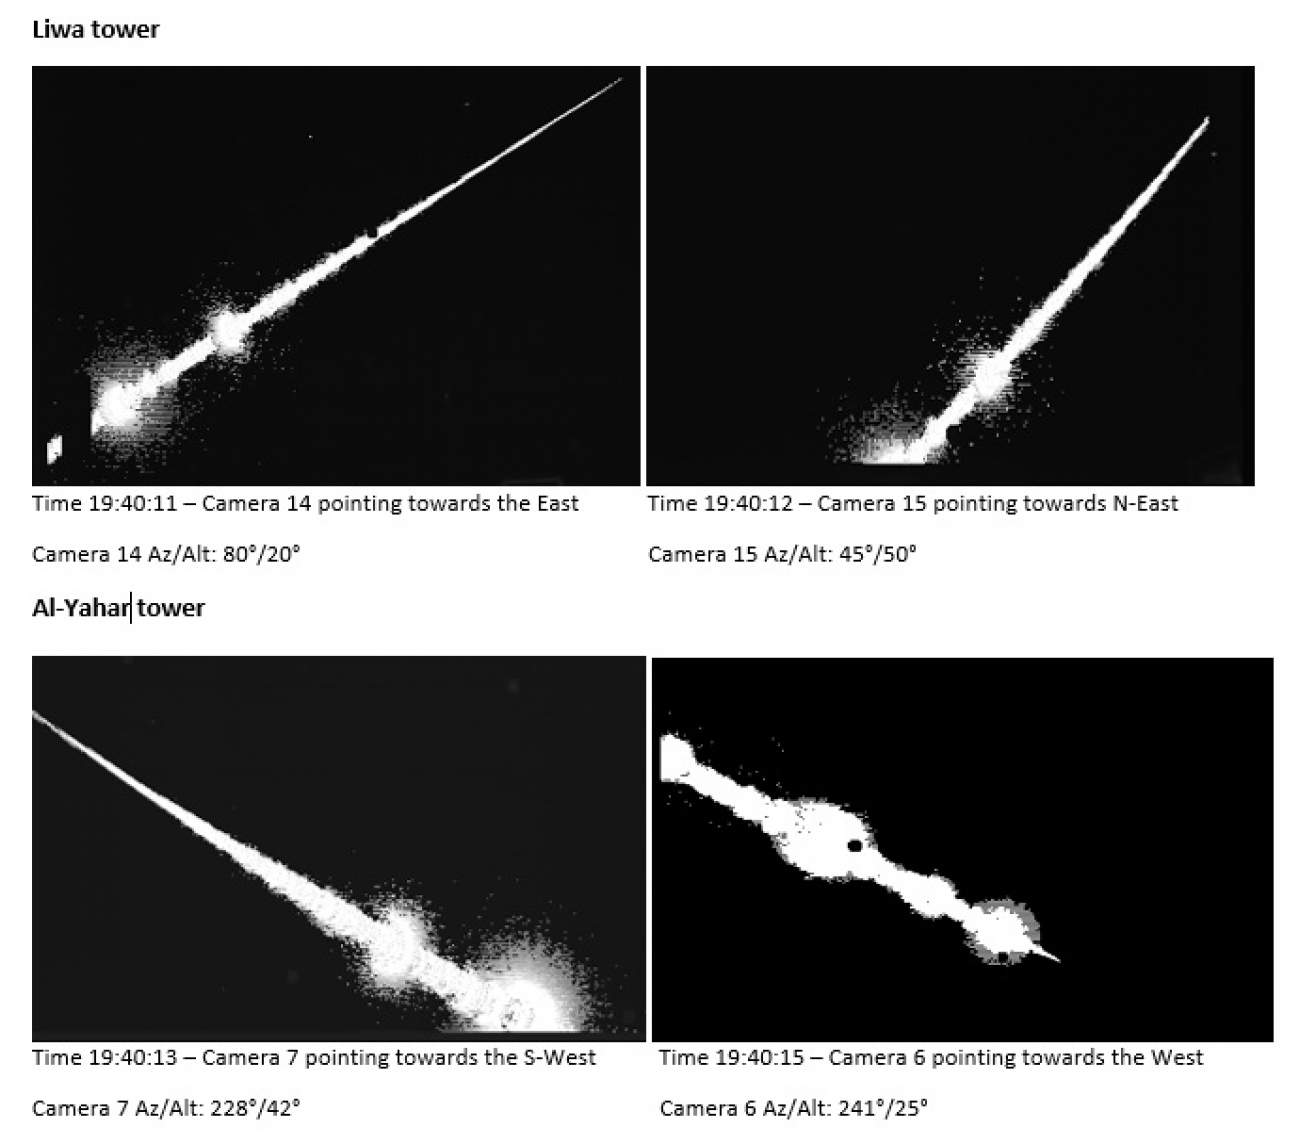 Bright Meteor Event Observed on the evening of March 5th by SCASS Towers